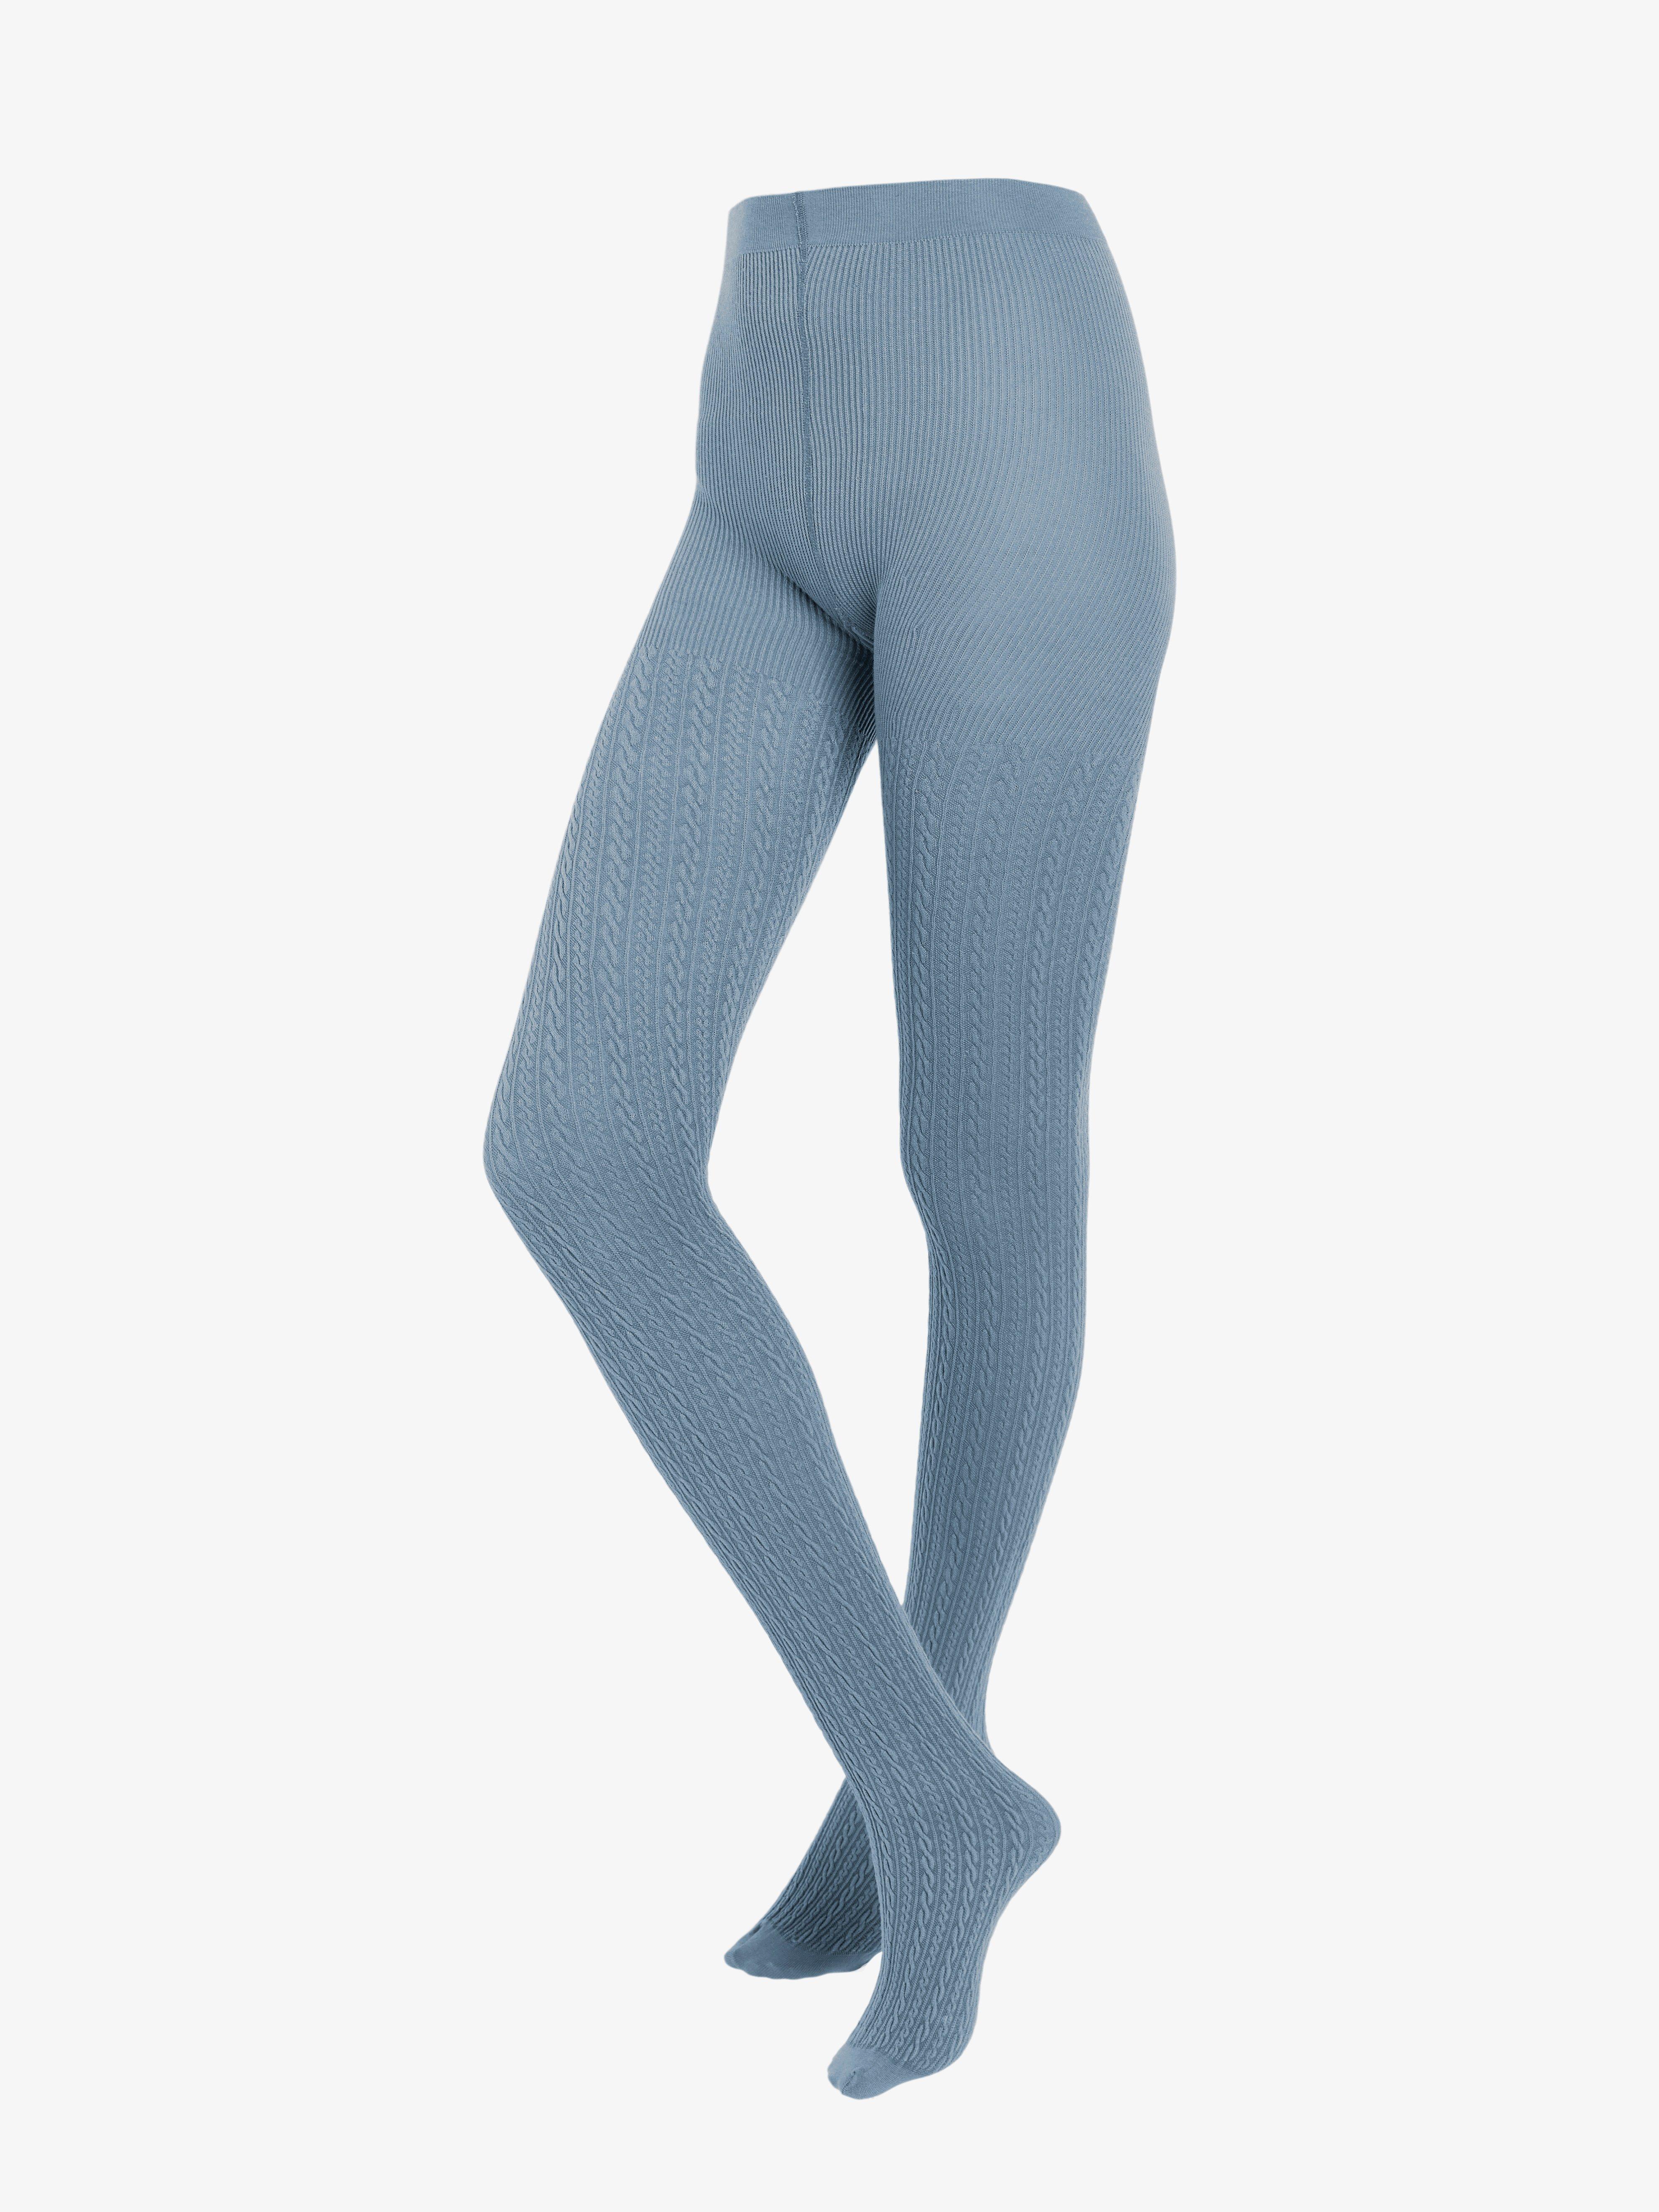 https://i8.amplience.net/i/Lindex/7941271_9603_PS_F/blue-blue-cable-knit-tights-in-lyocell-blend?fmt=auto&$qltDefault$&$cache$&$crop$&$scaleFit$&$productDetailSwiperV2$&vw=600&$crop2x$&$fmtQlt2x$